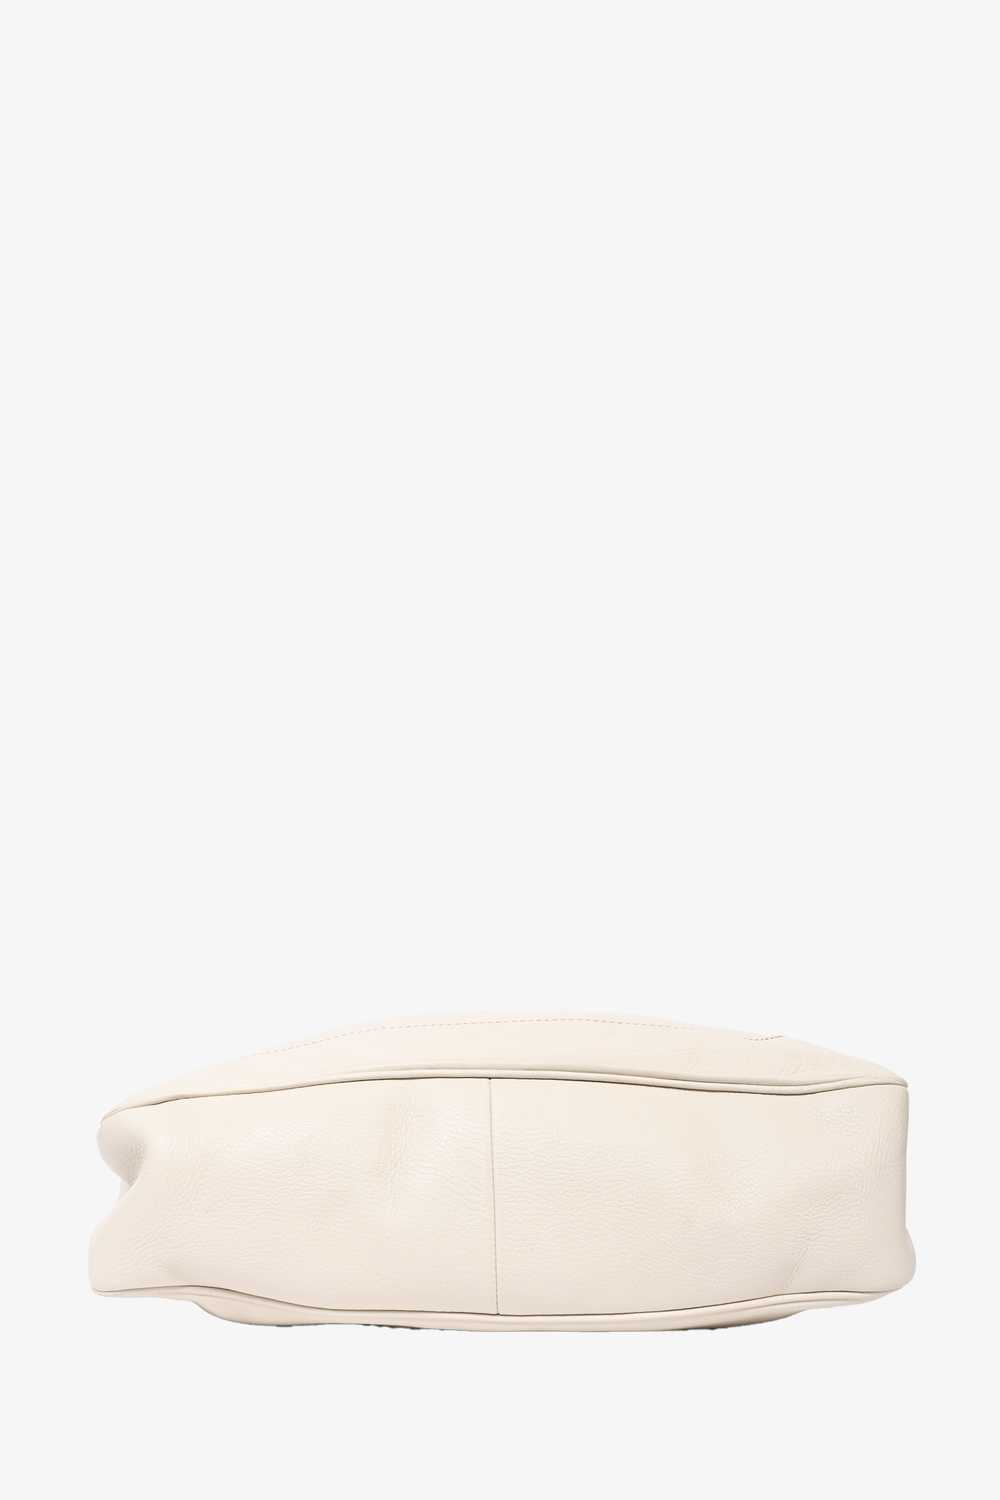 Gucci Cream Leather Bamboo 'Diana' Large Tote - image 6